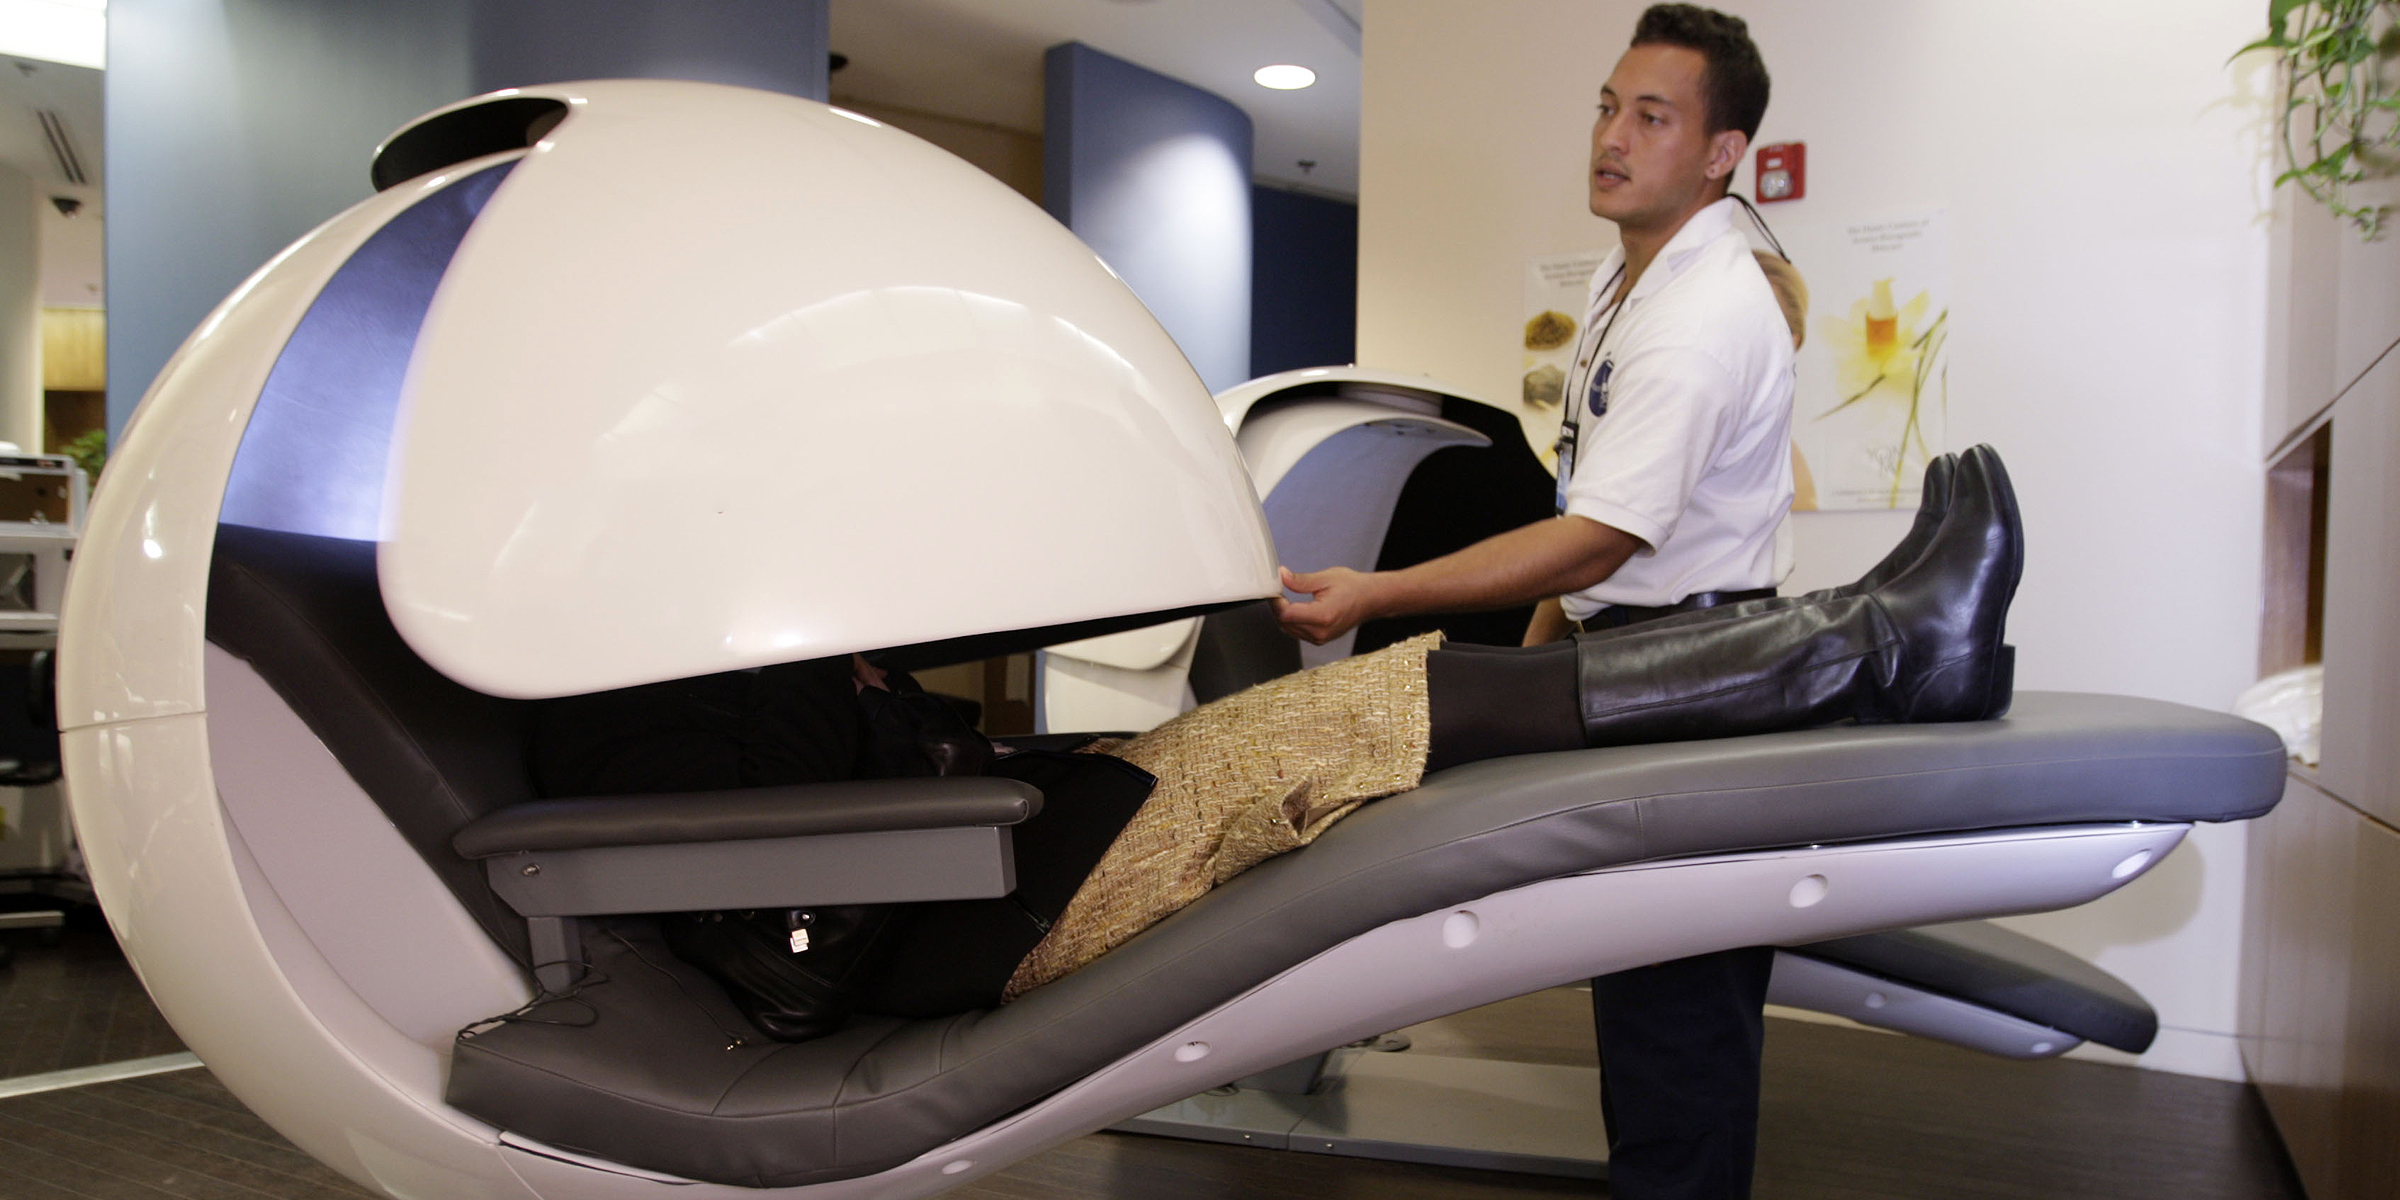 People utilizing sleep pods | Source: Getty Images